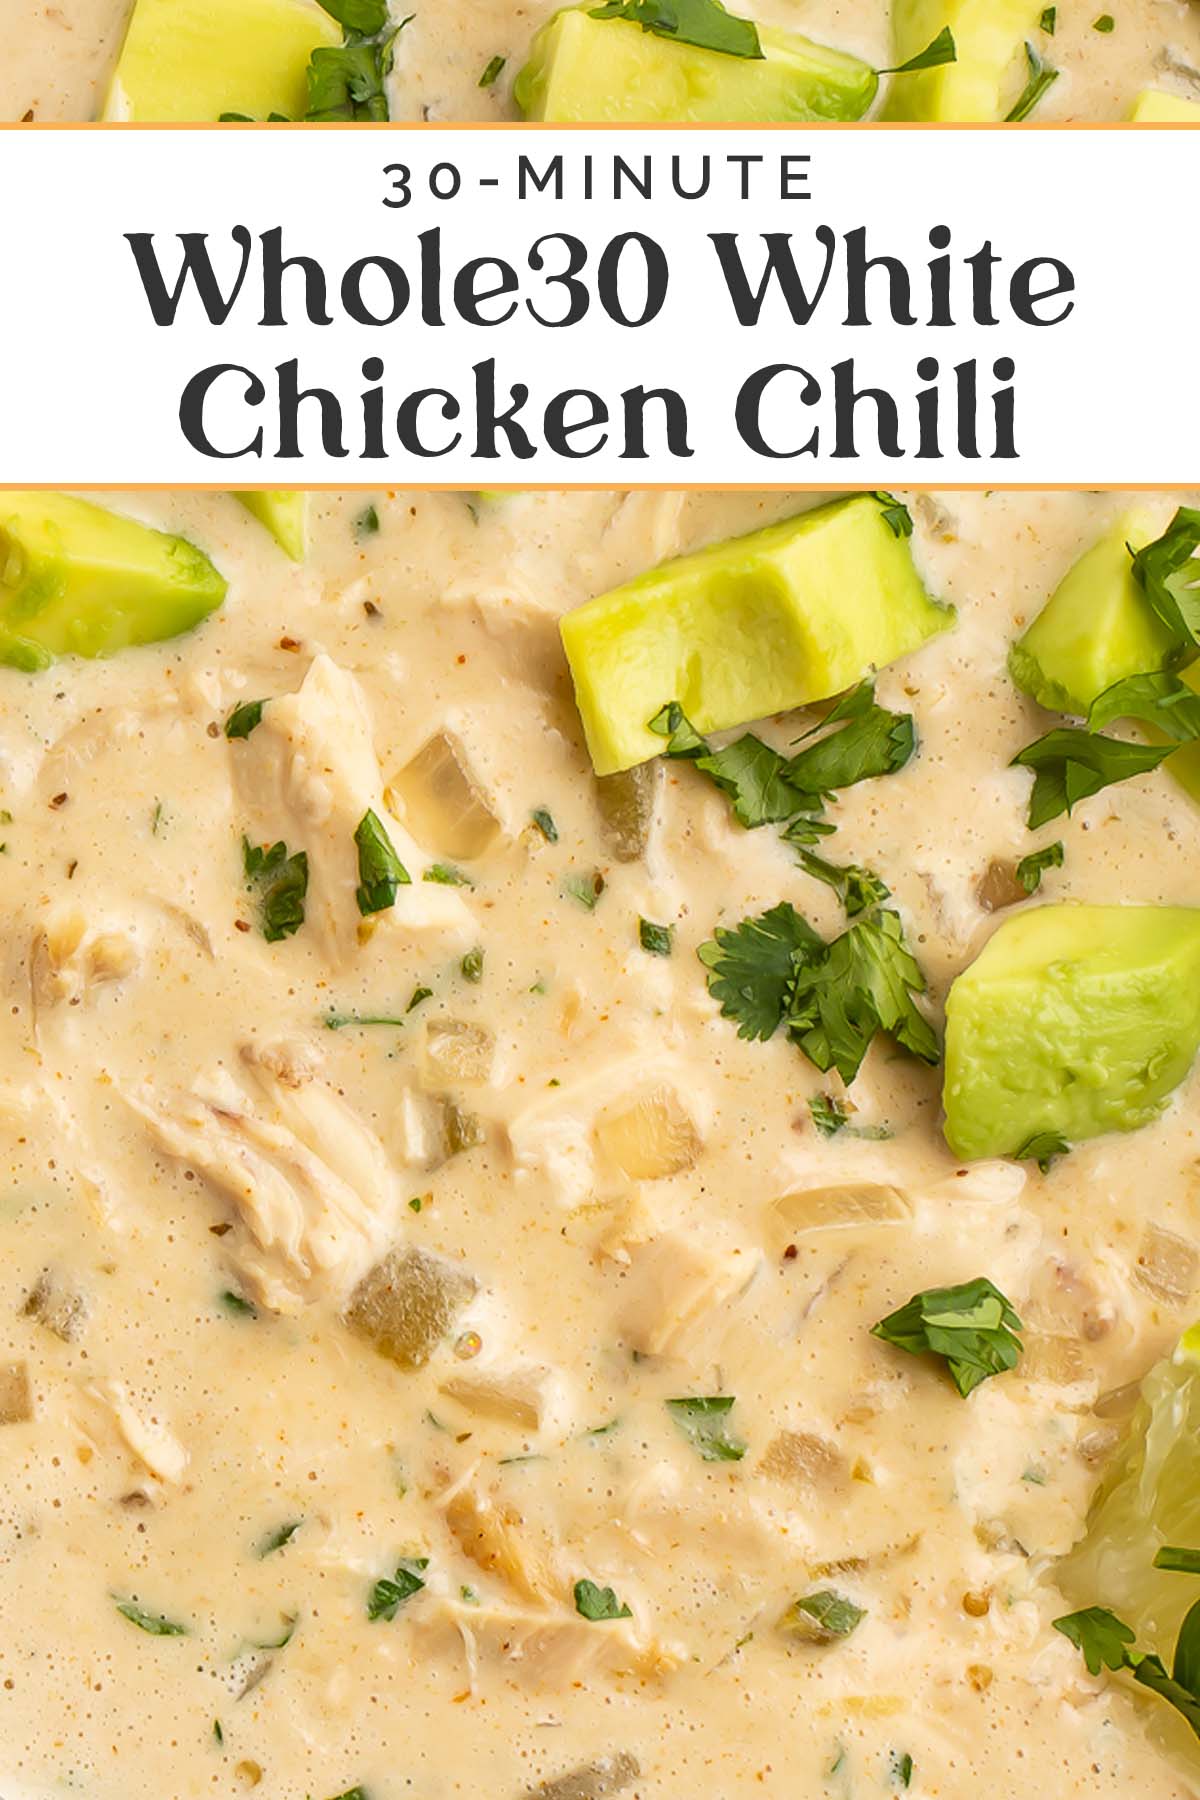 Pin graphic for Whole30 white chicken chili.